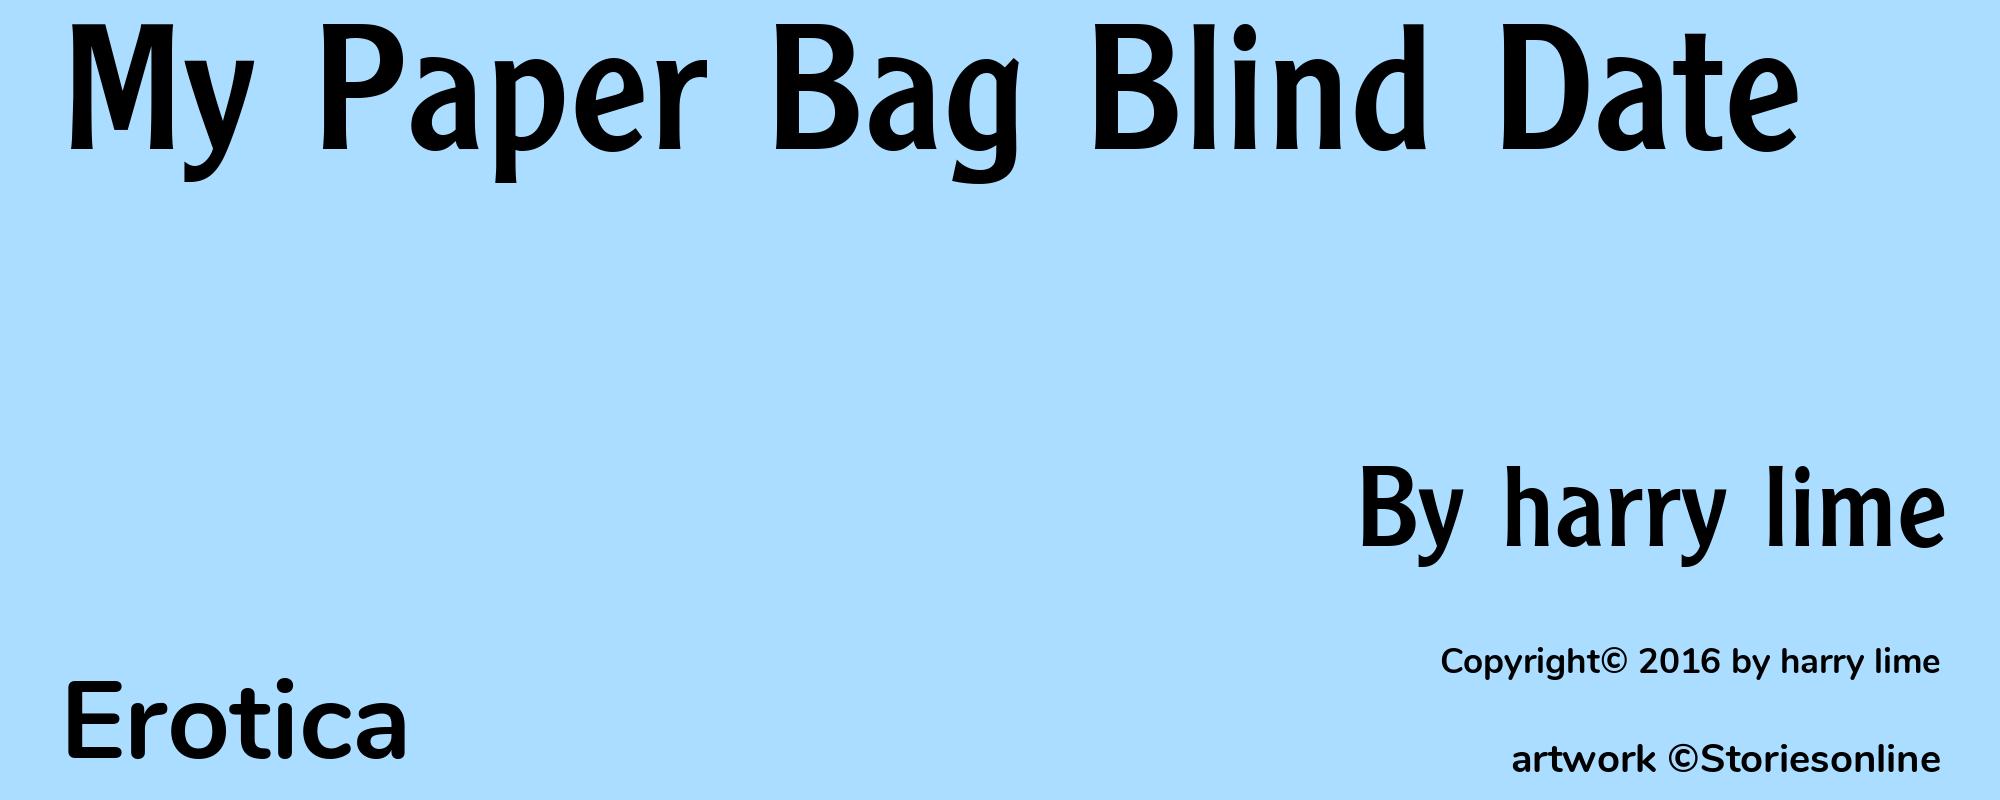 My Paper Bag Blind Date - Cover